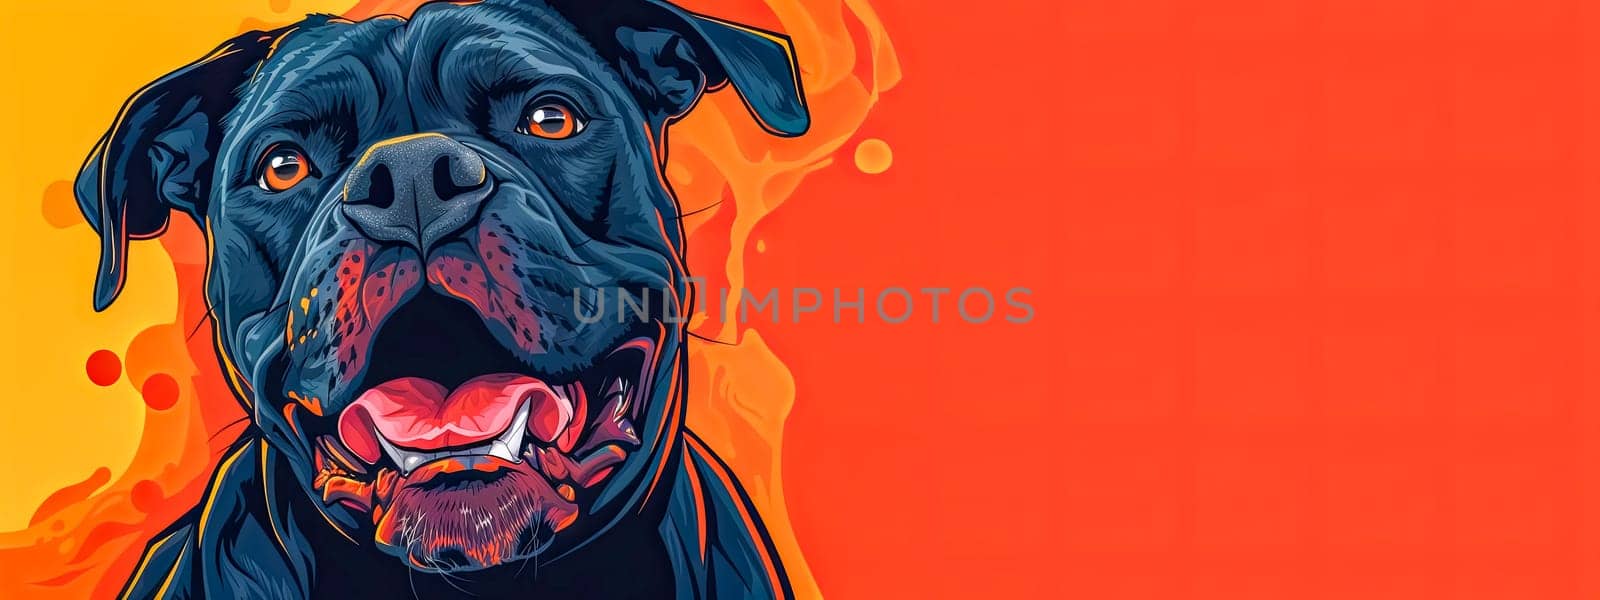 a painting of a black dog with its tongue out on a red and yellow background, copy space by Edophoto